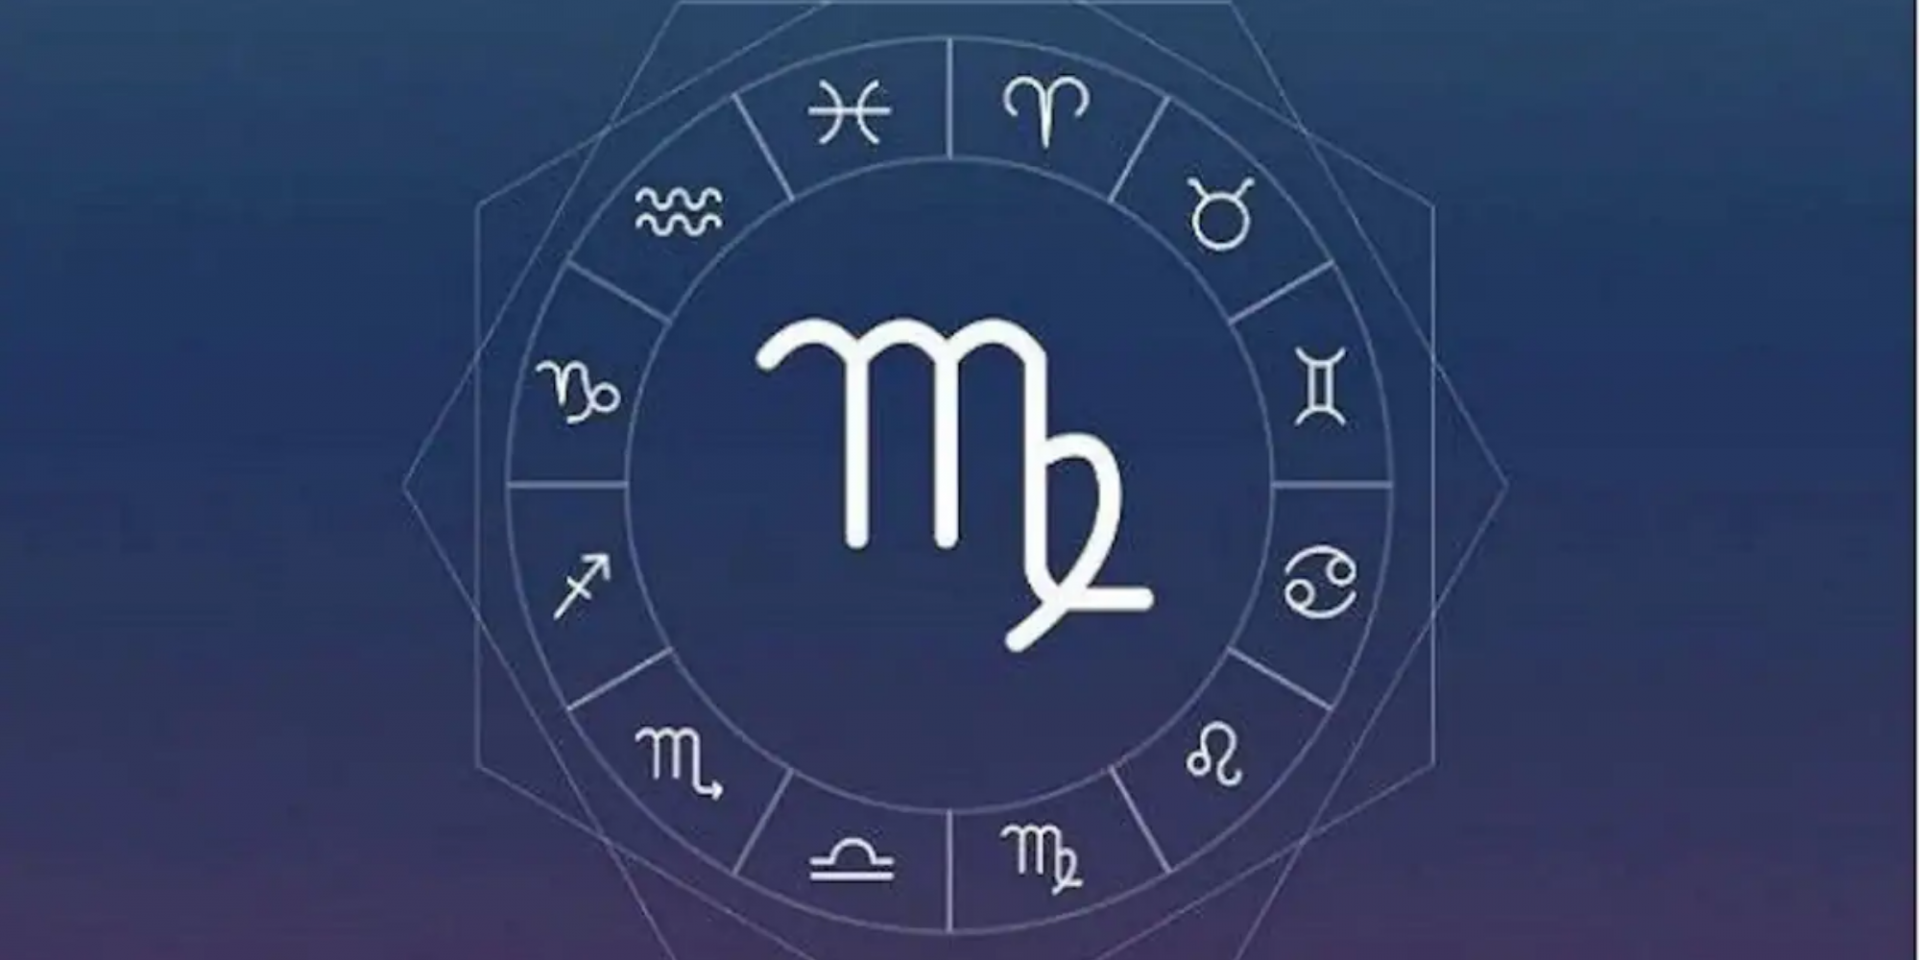 VIRGO Yearly Horoscope 2022 - Astrological Prediction for Love, Career, Money and Health